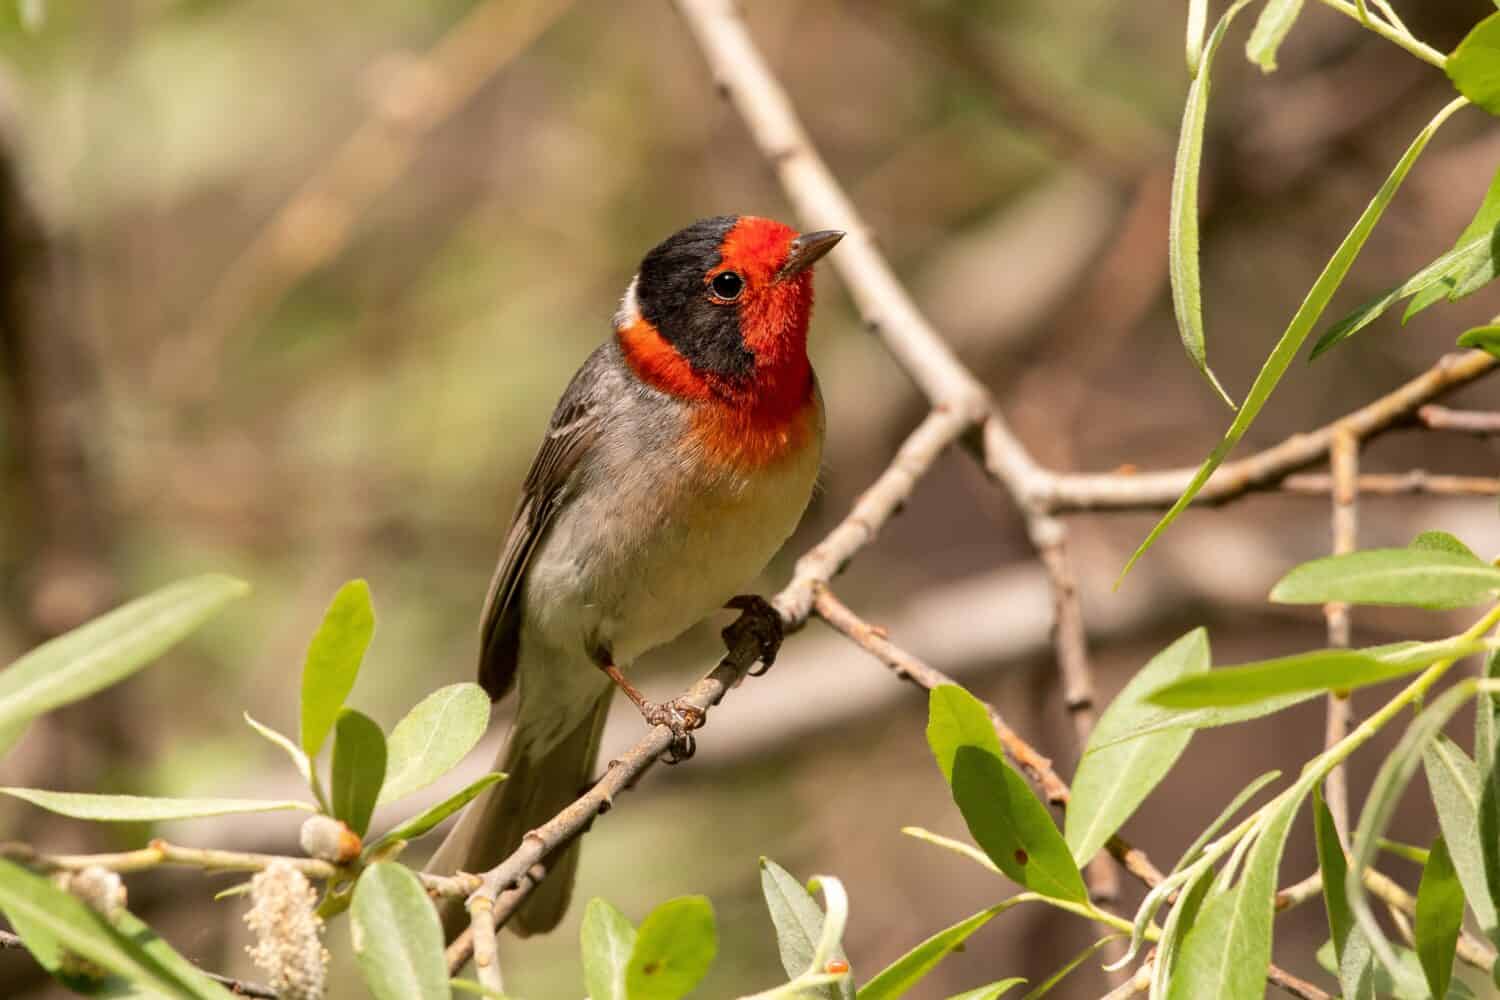 Red-faced warbler sitting on a perch